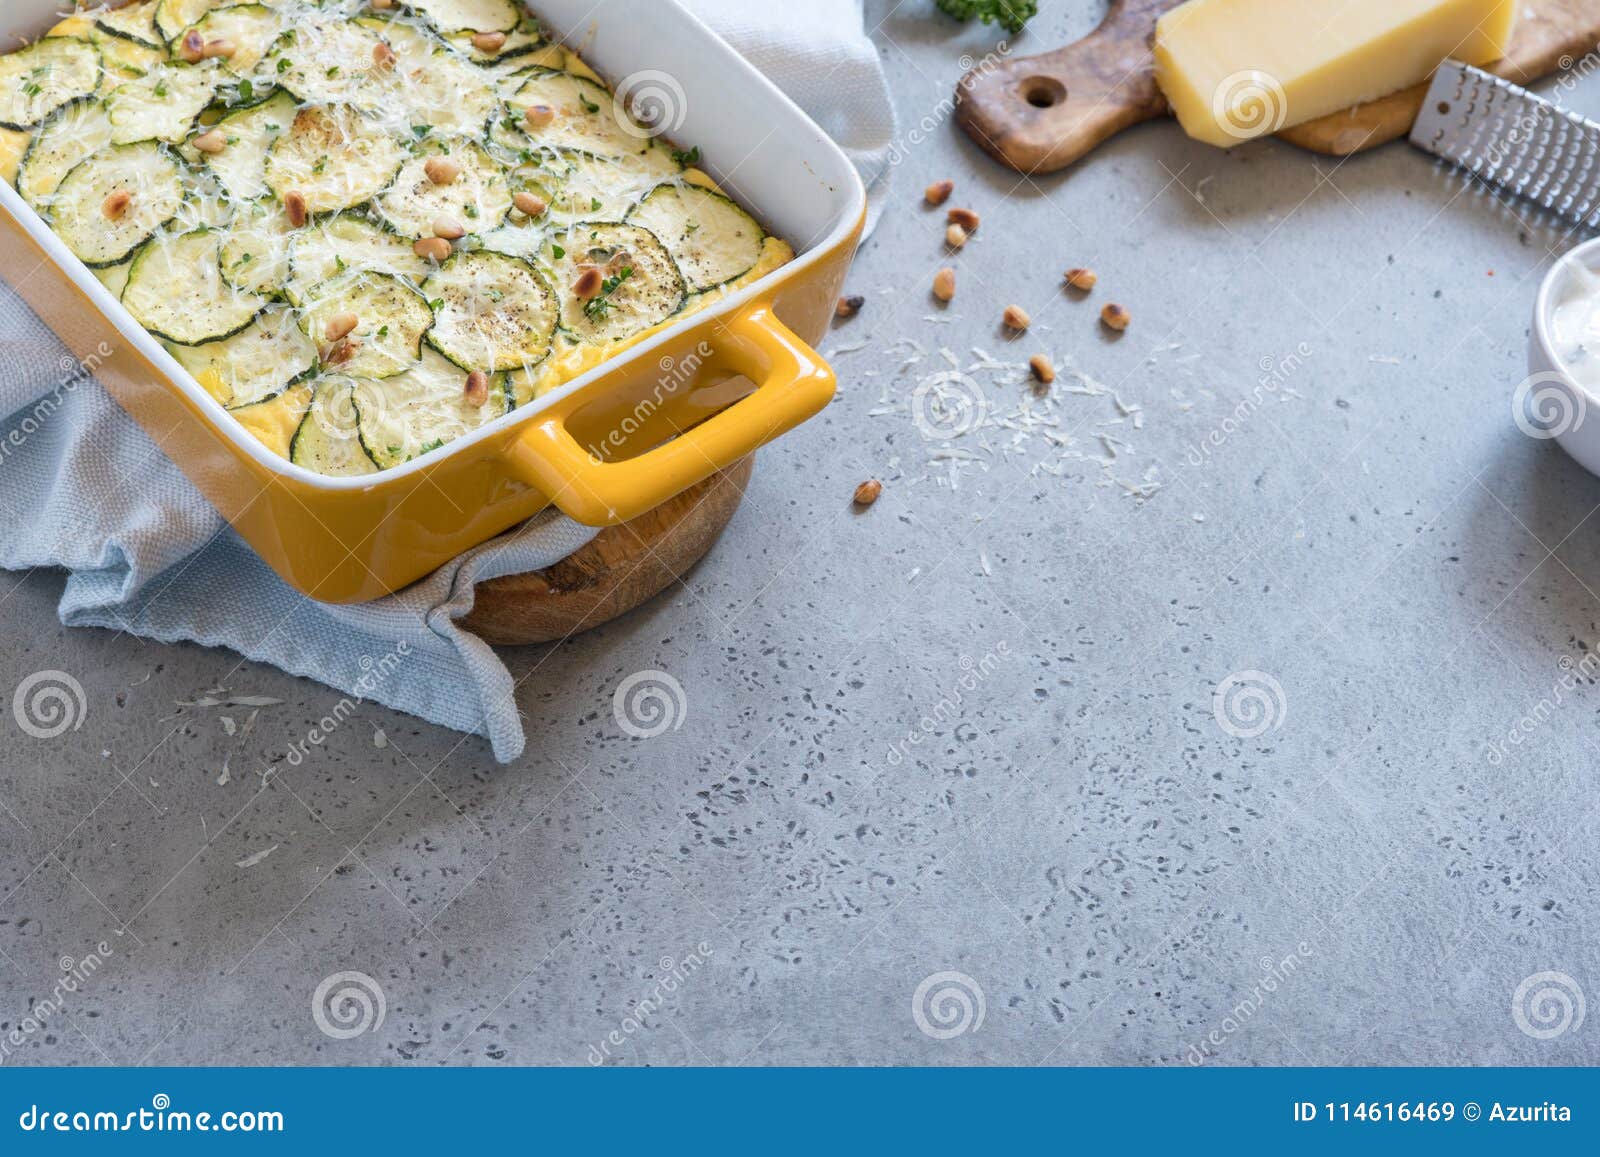 Zucchini Casserole with Cheese Stock Image - Image of cooked, parsley ...